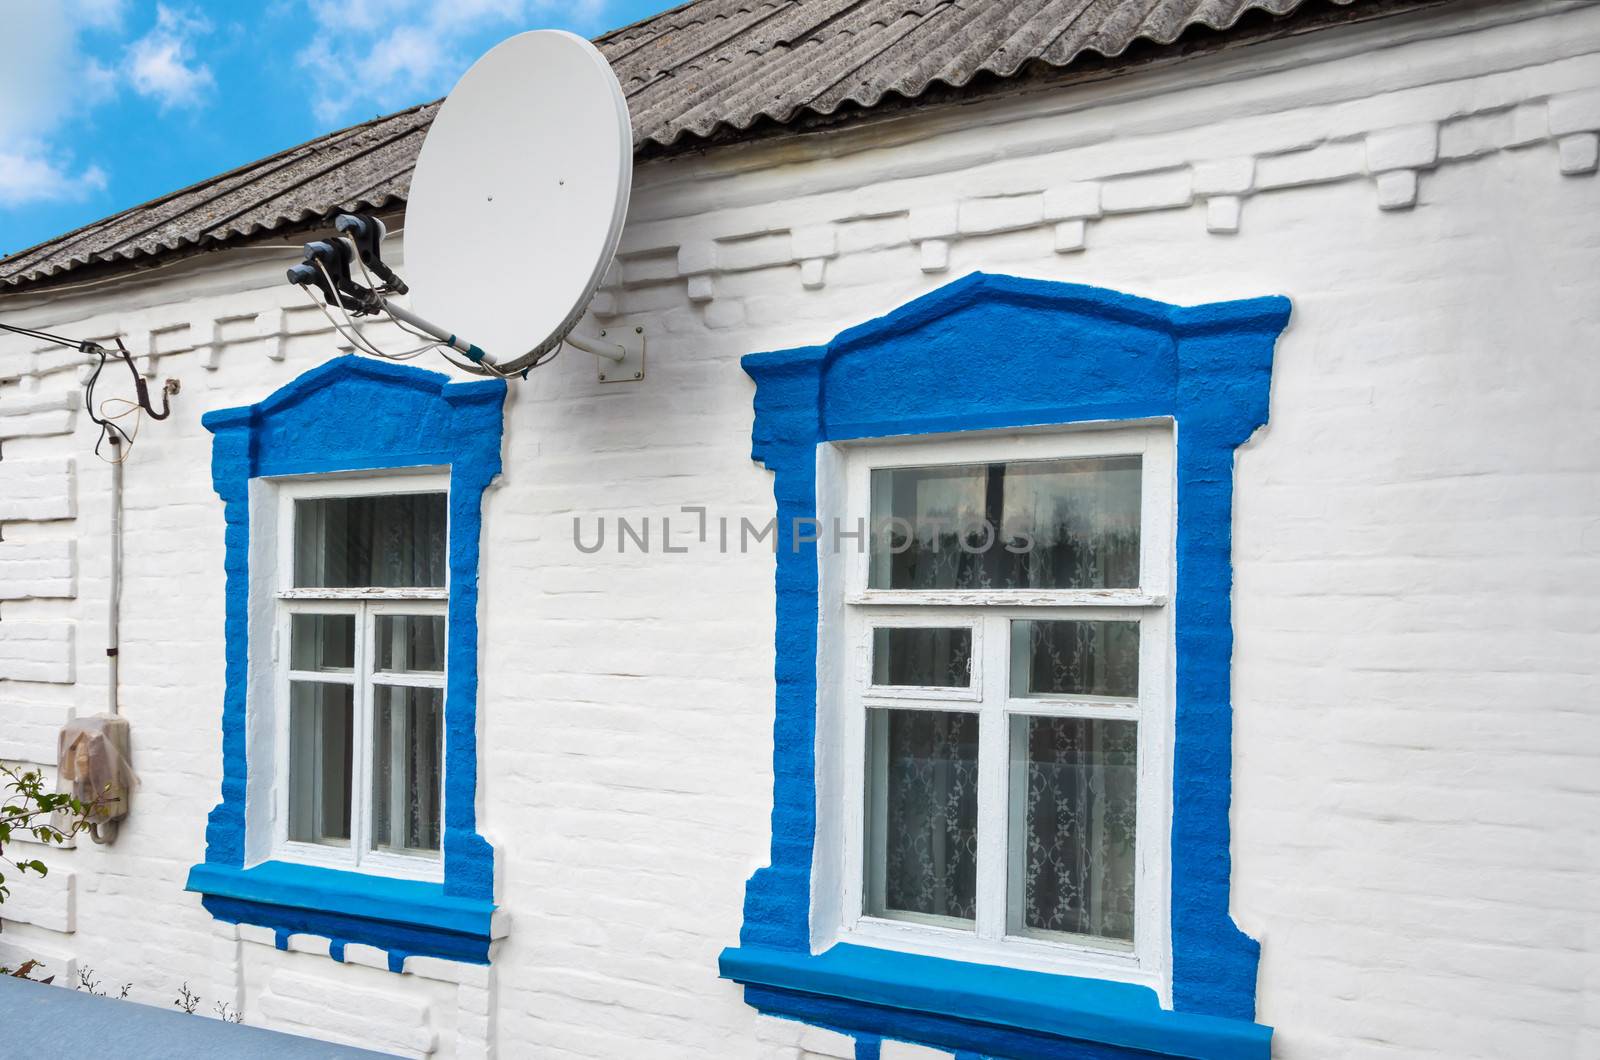 A satellite dish capable of accepting three satellites on the wall of the rural house.